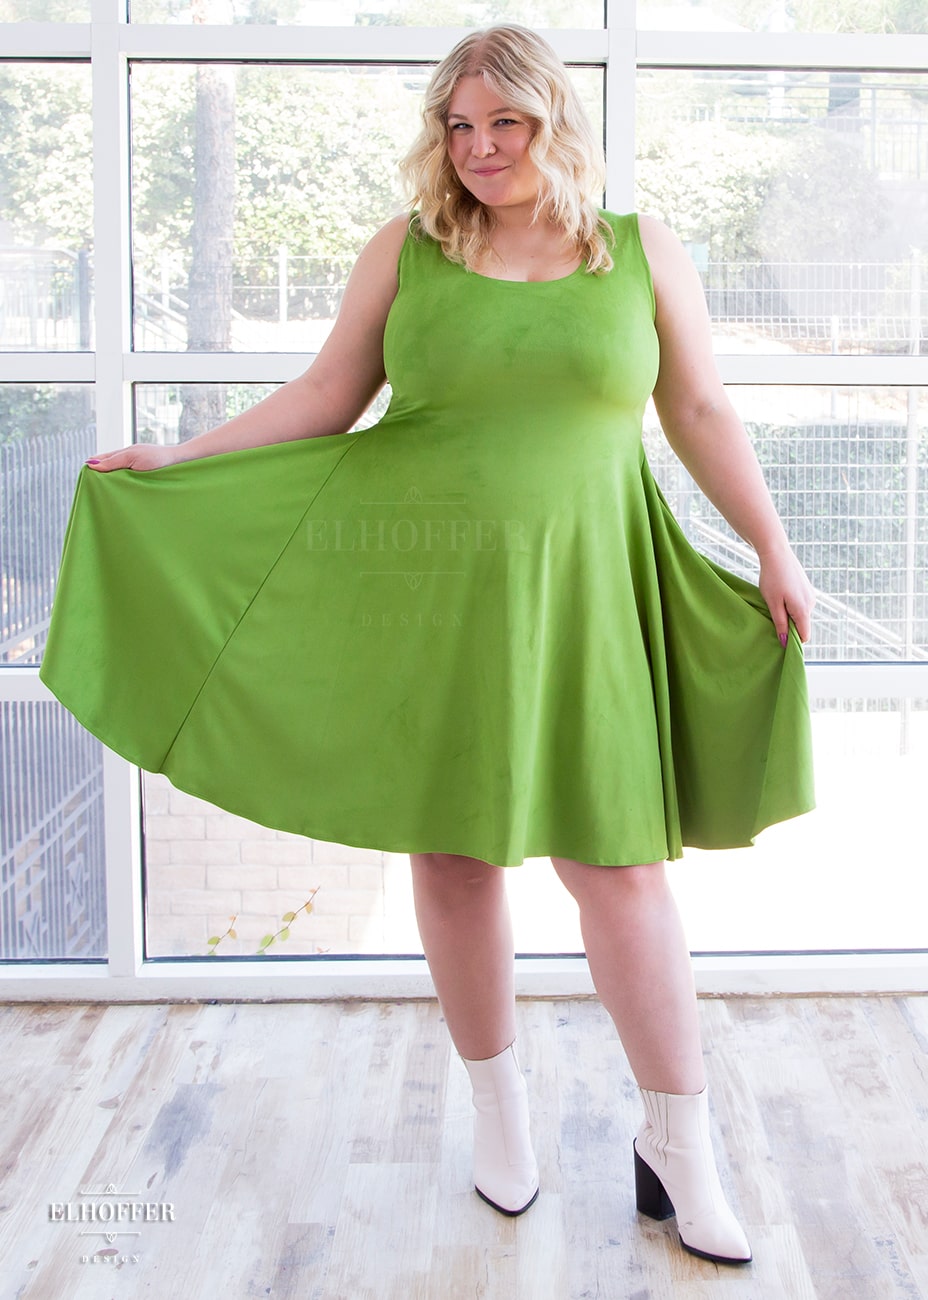 Sarah, a fair skinned size XL model with long blonde hair, wears a light green suede knee length dress with fitted torso and full skirt. She holds out the side of the dress to show off the generous amount of fabric.